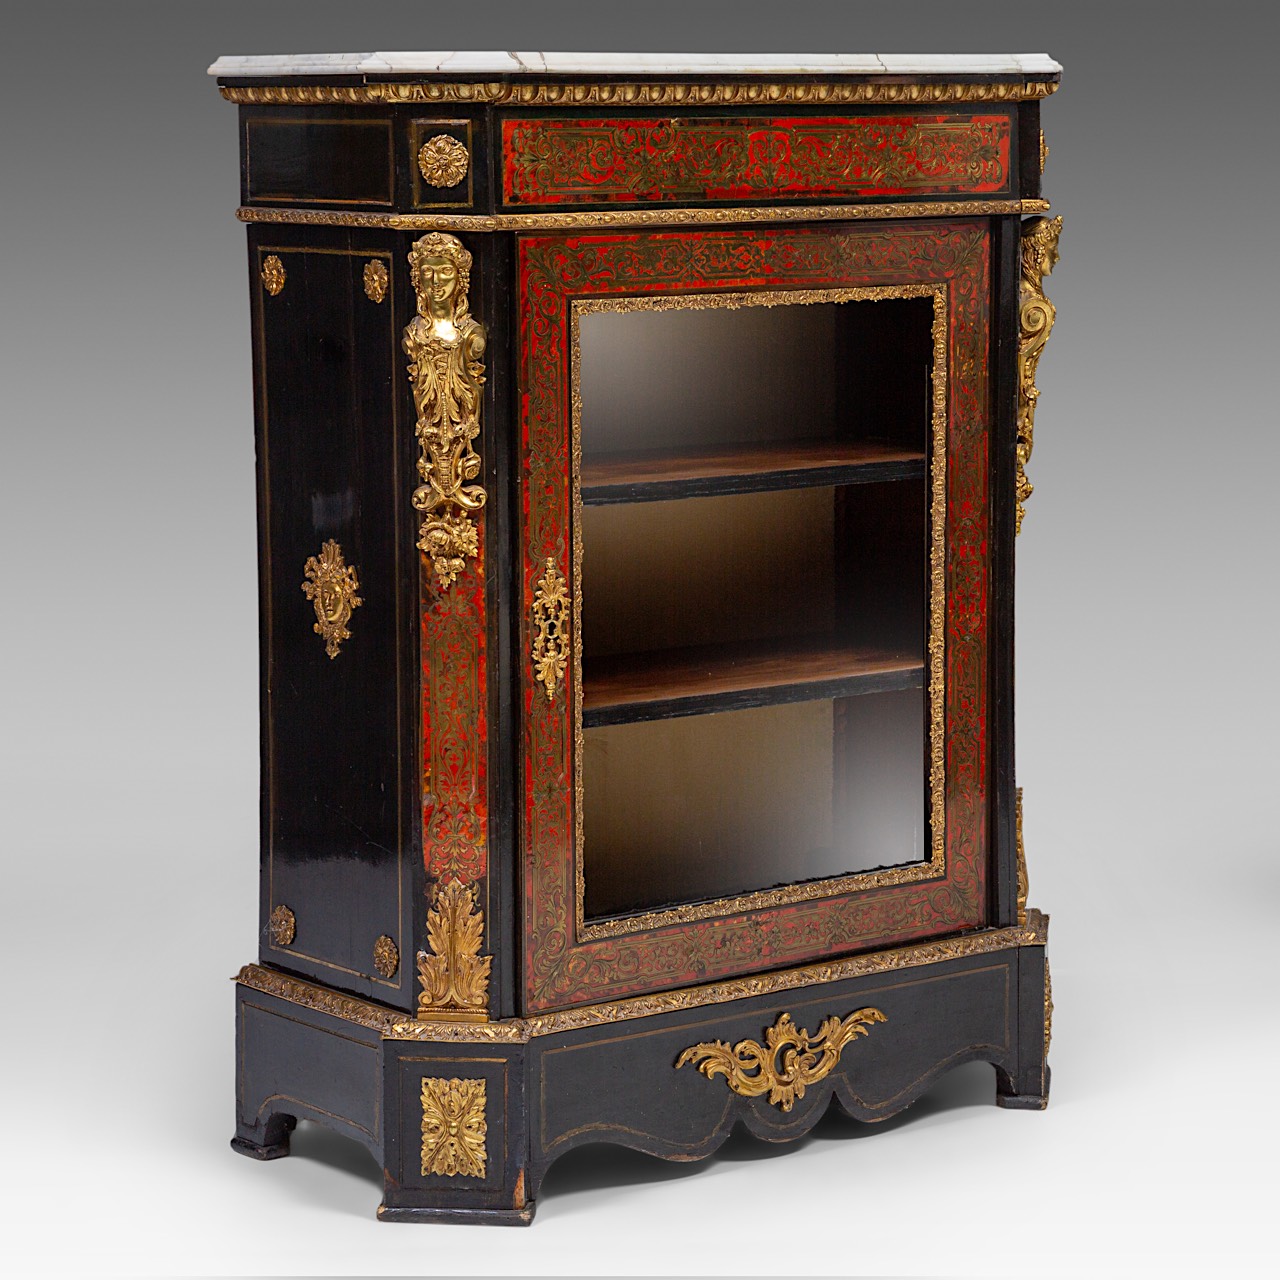 A Napoleon III (1852-1870) Boulle work display cabinet with gilt bronze mounts and marble top, H 112